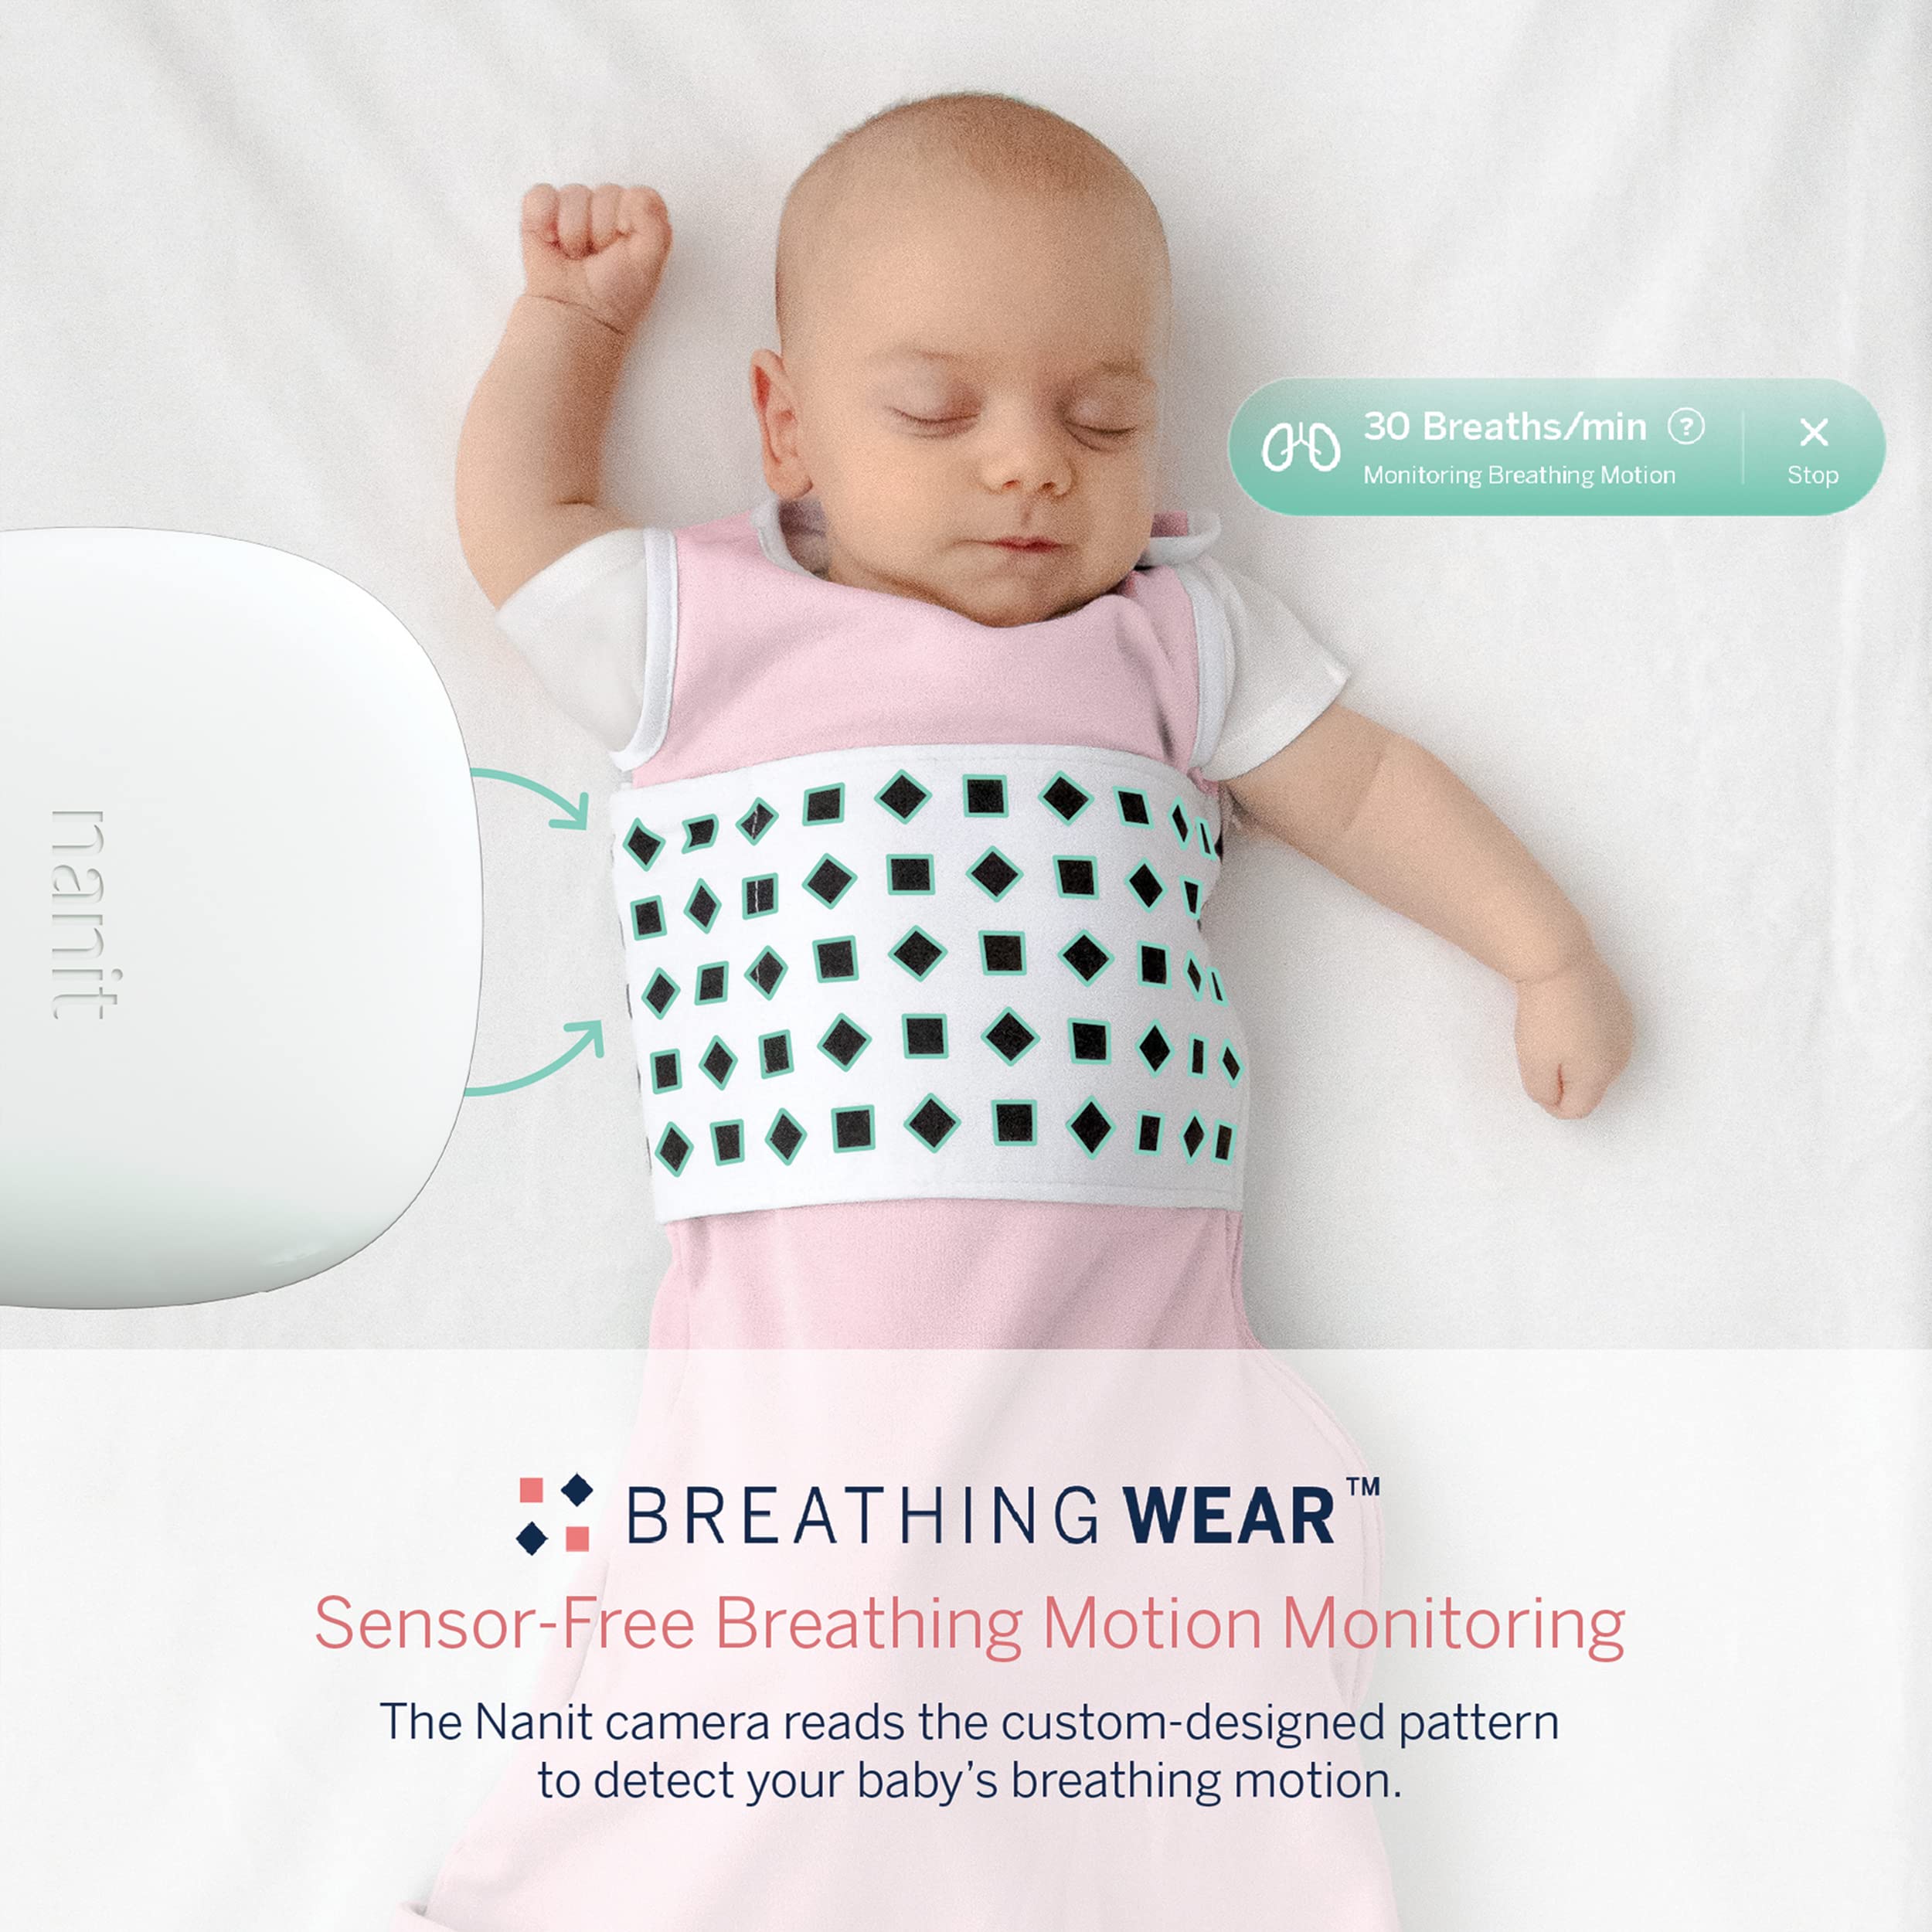 Nanit Breathing Wear Sleeping Bag – 100% Cotton Baby Sleep Sack - Works Pro Baby Monitor to Track Breathing Motion Sensor-Free, Real-Time Alerts, Size Small, 3-6 Months, Blush Pink